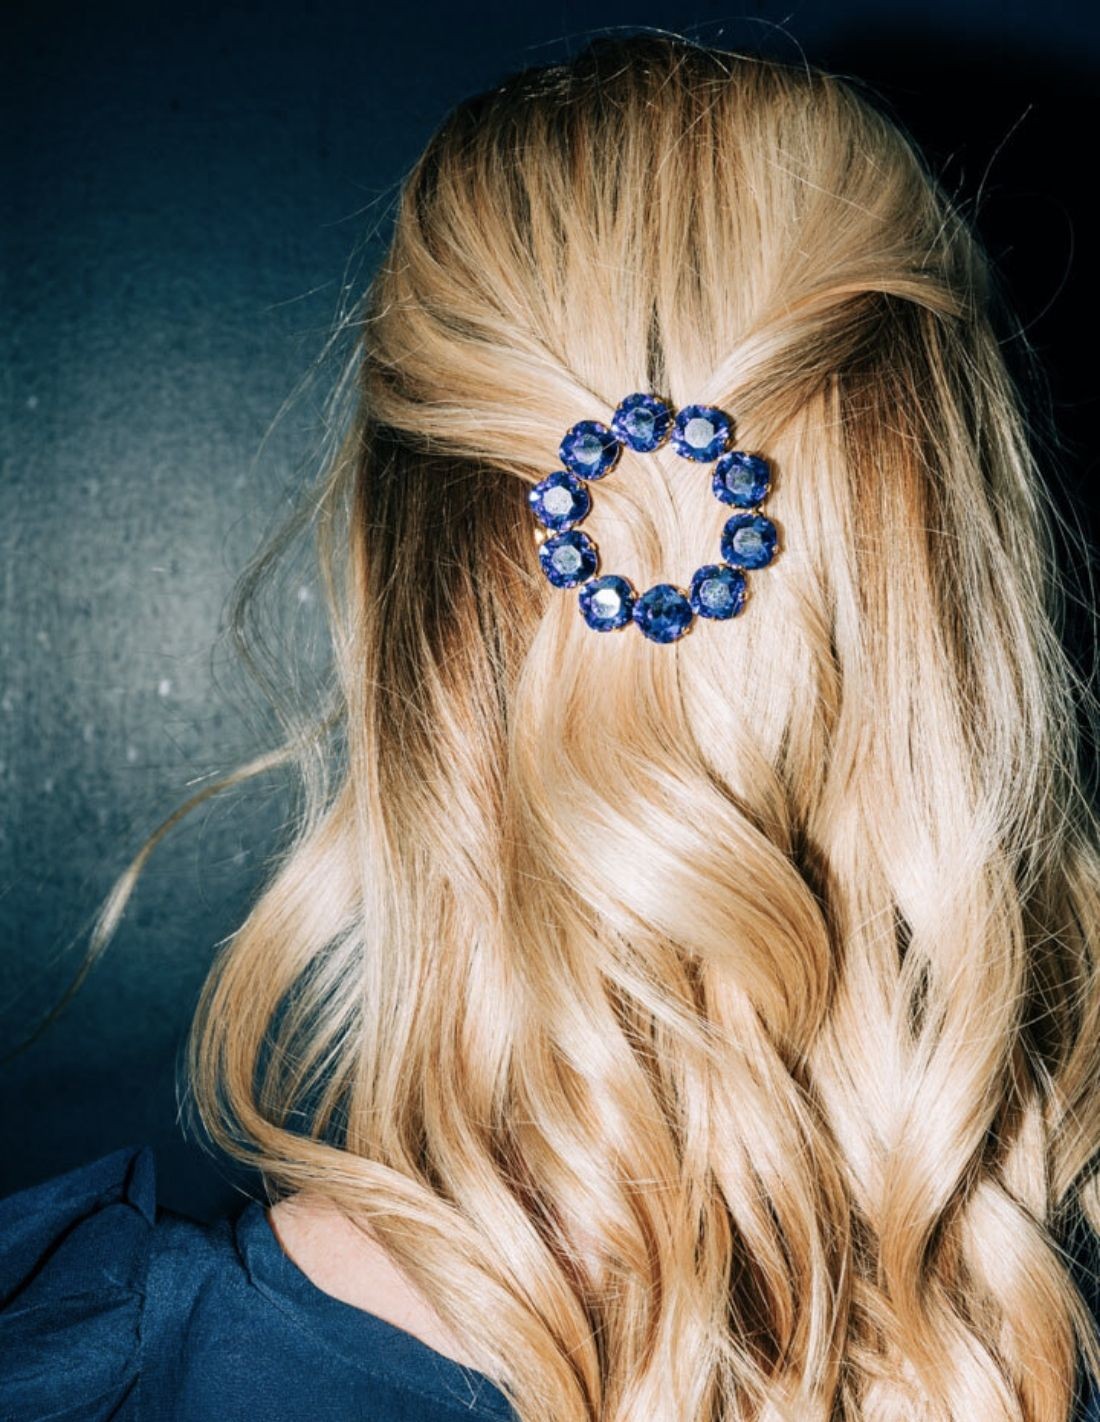 Round hair barrette with crystals for events